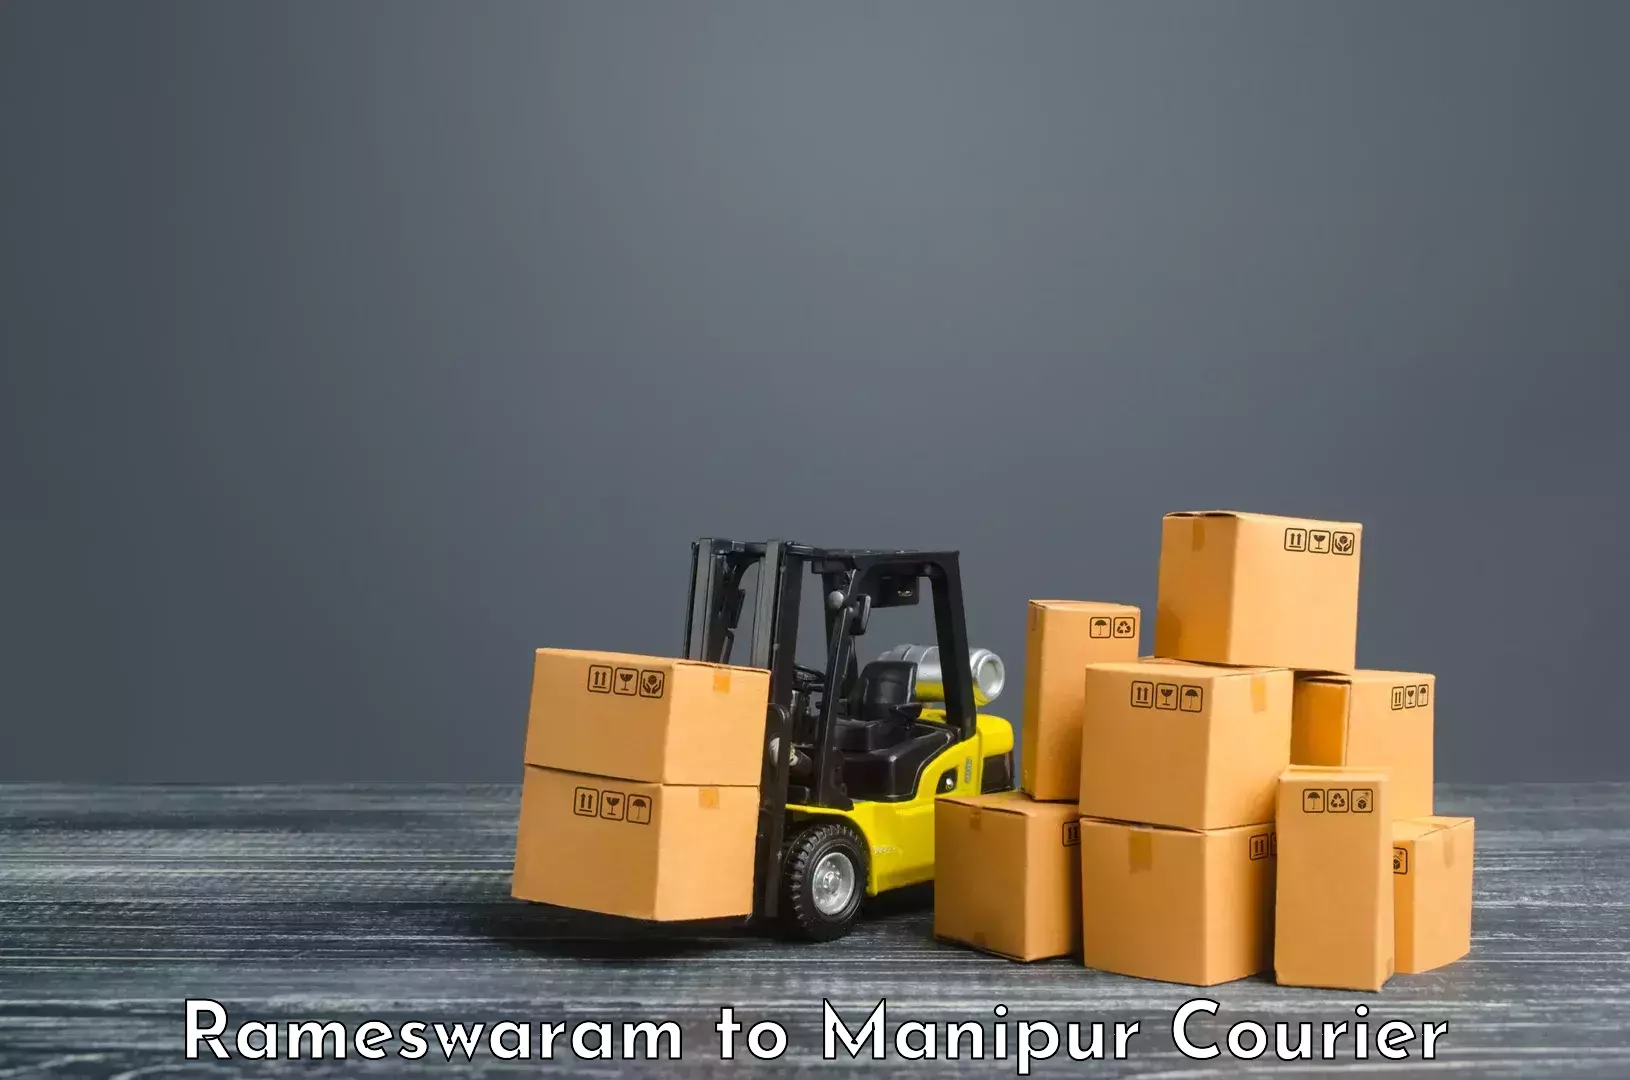 Nationwide delivery network Rameswaram to Manipur